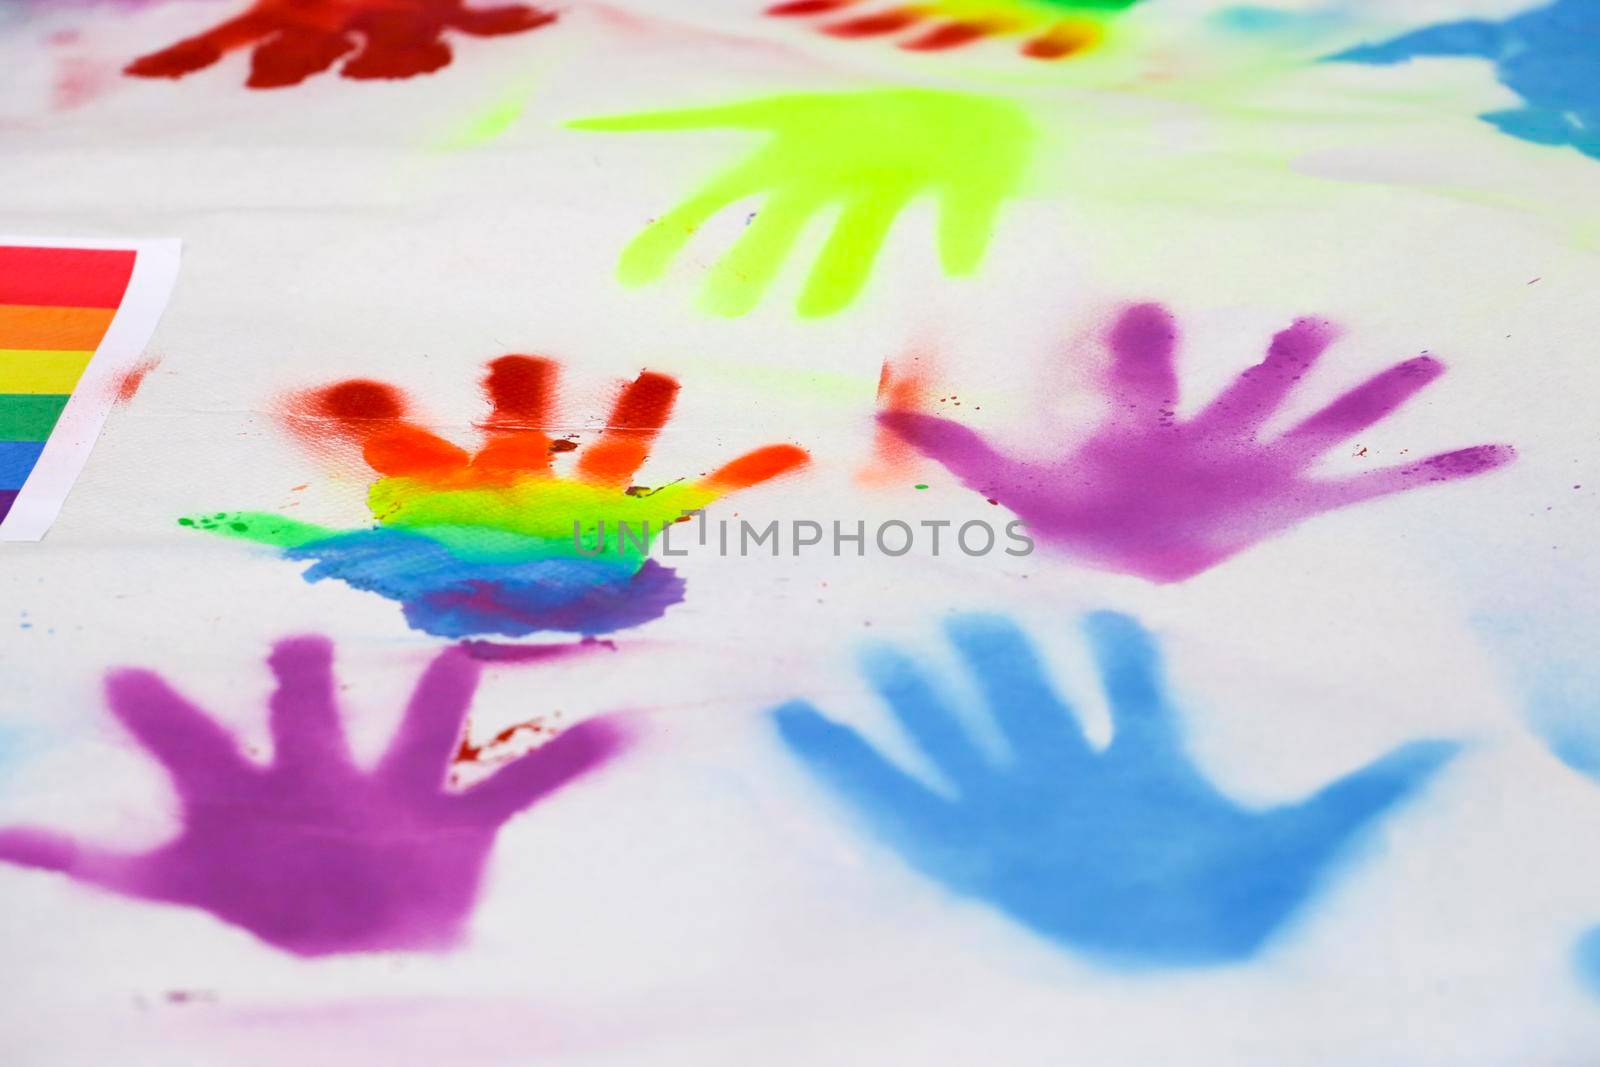 Santa Pola, Alicante, Spain- July 2, 2022: Colorful banners painted by children for the Gay Pride Parade in Santa Pola